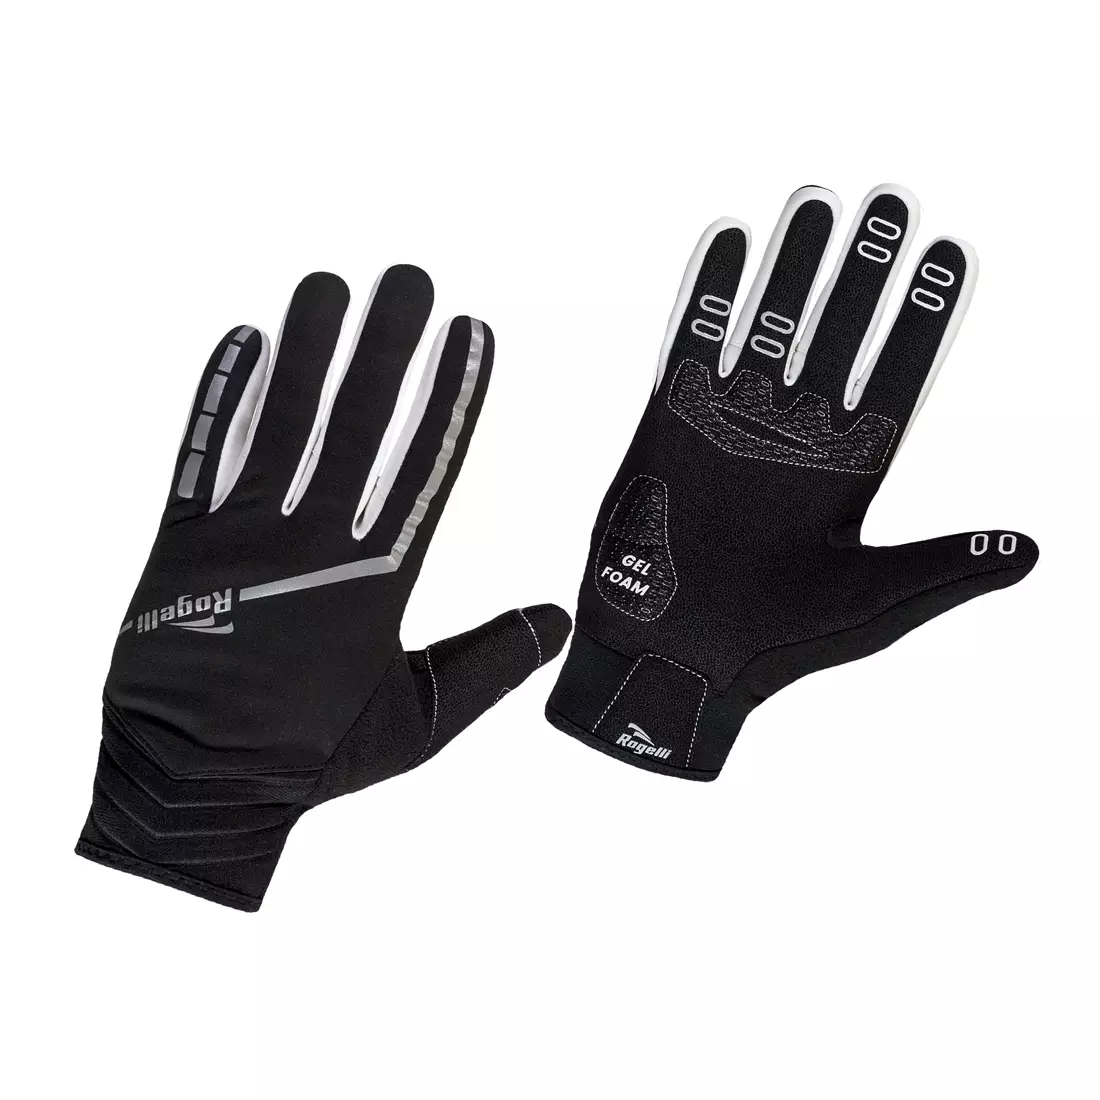 Rogelli Inverno winter cycling gloves, black and white